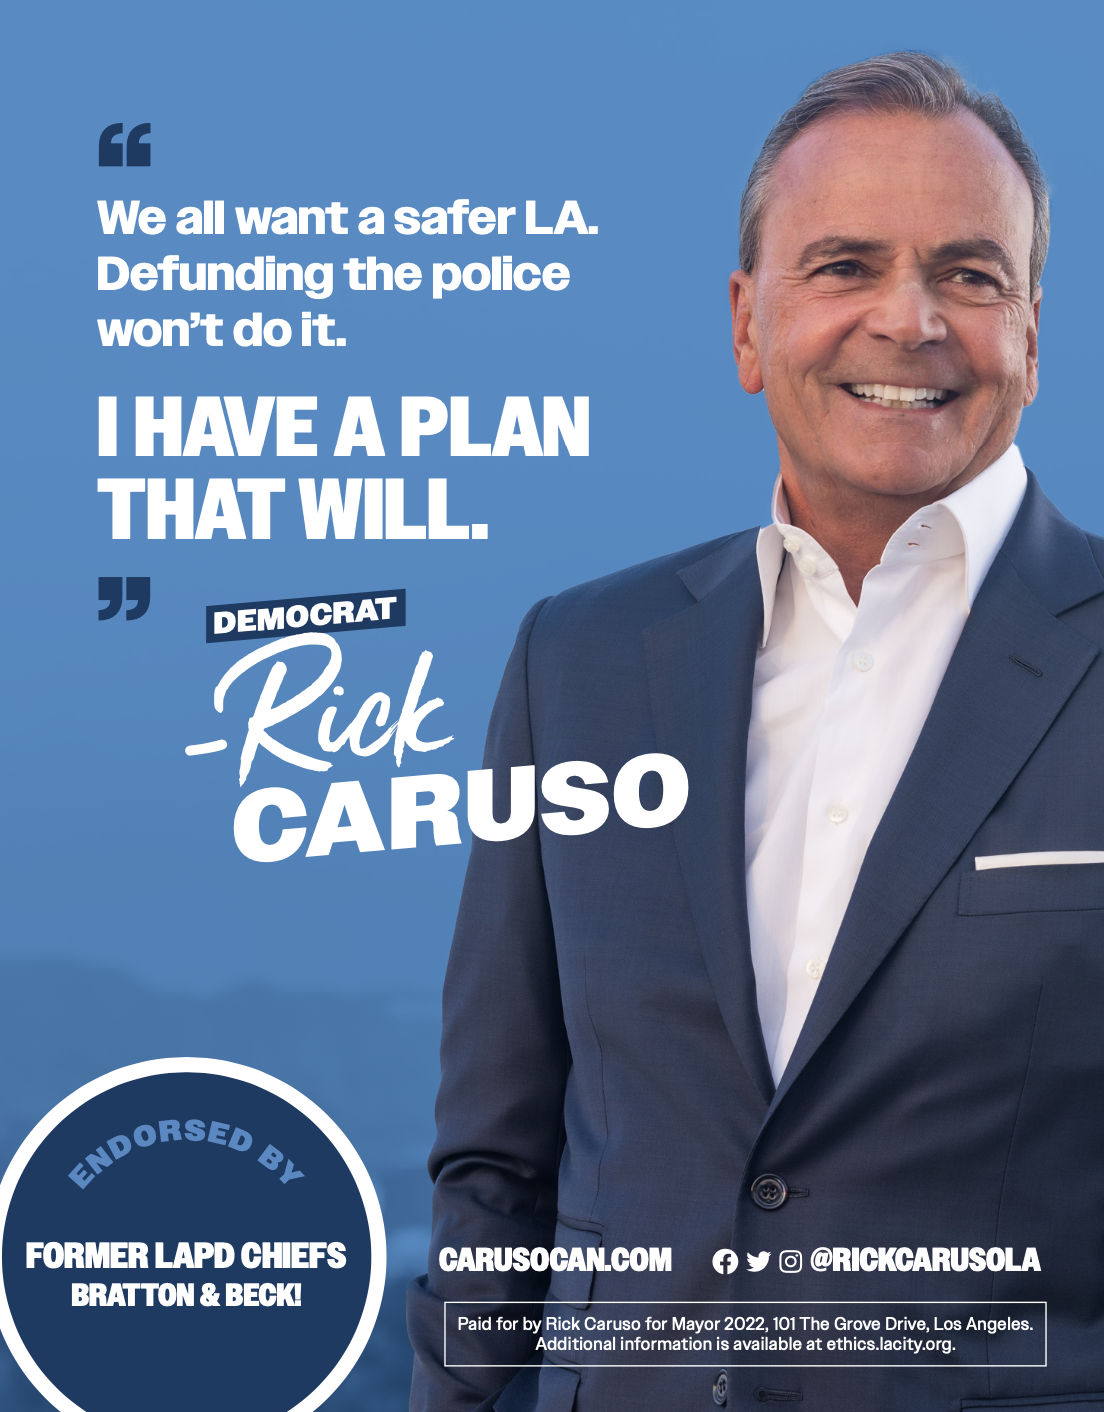 the front of a Rick Caruso LA mayoral campaign mailer, with a large picture of caruso and a quote that says "We all want a safer LA. Defunding the police won't do it. I HAVE A PLAN THAT WILL" attributed to "DEMOCRAT" Rick Caruso